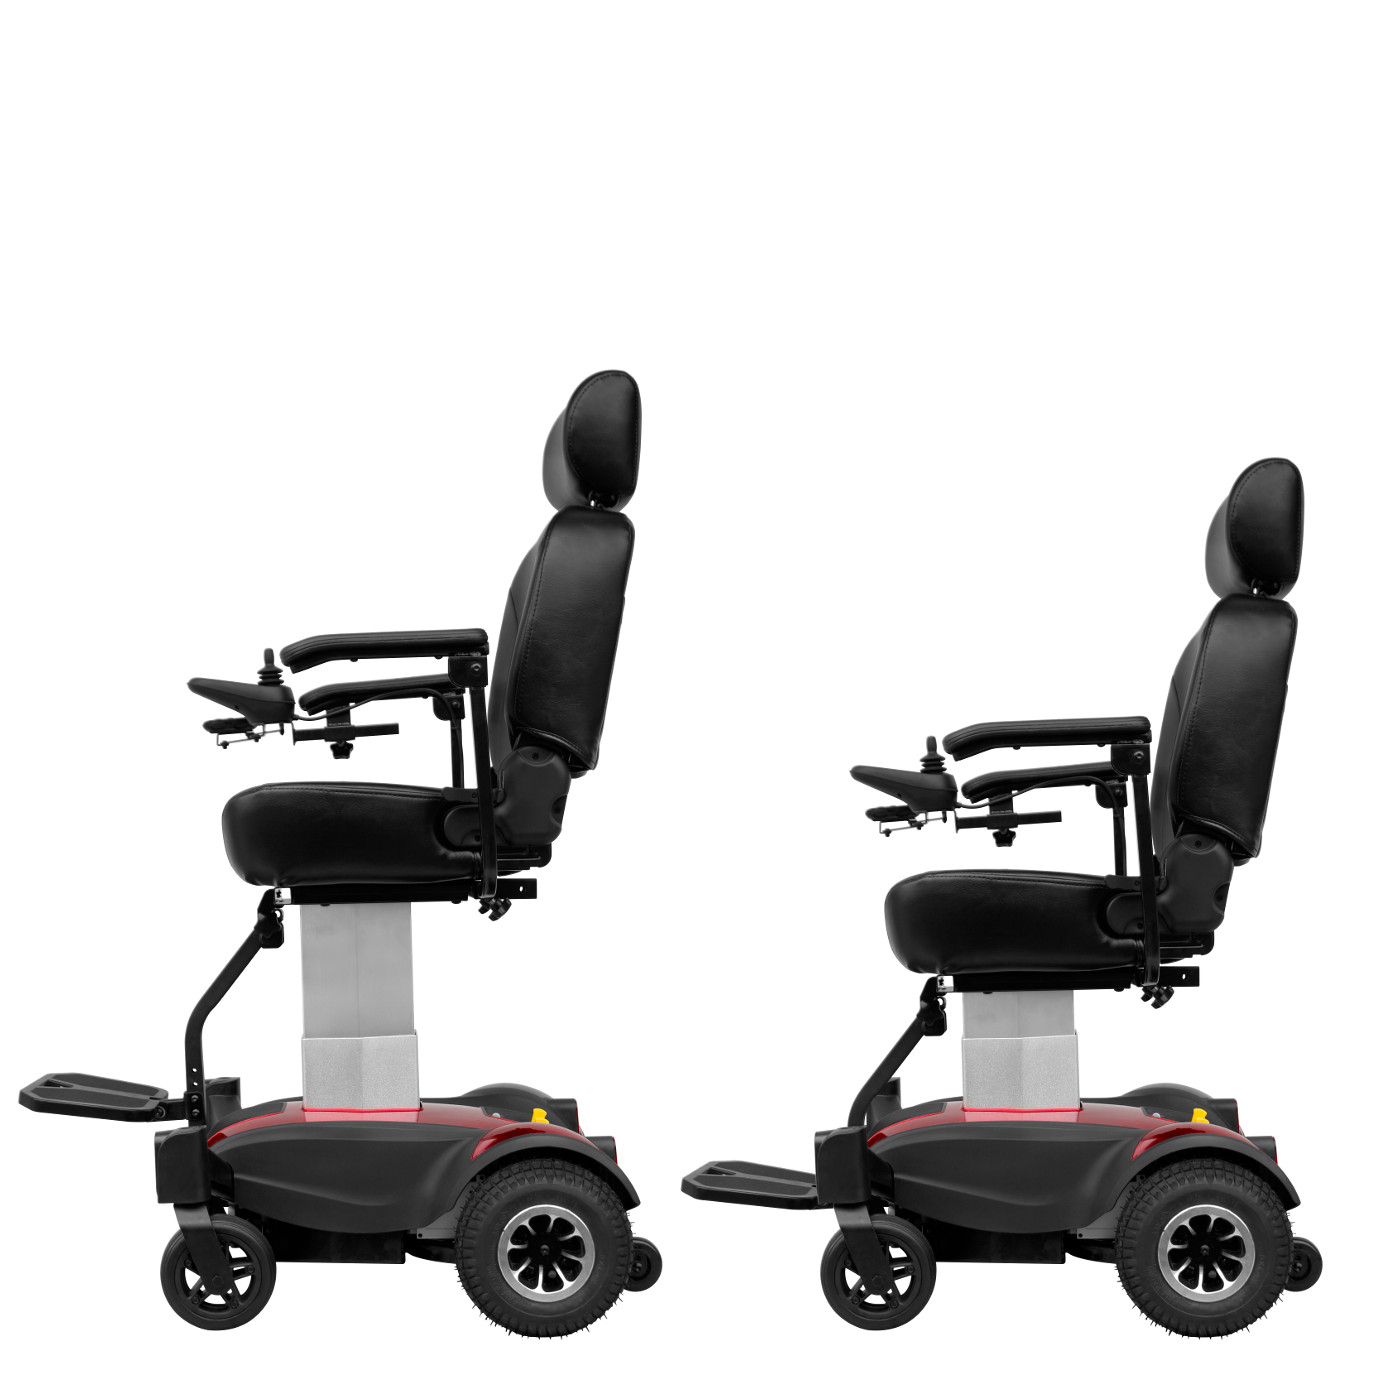 Electric Wheelchair - Solax - Seat Lift LAUNCH SPECIAL, While Stocks Last.